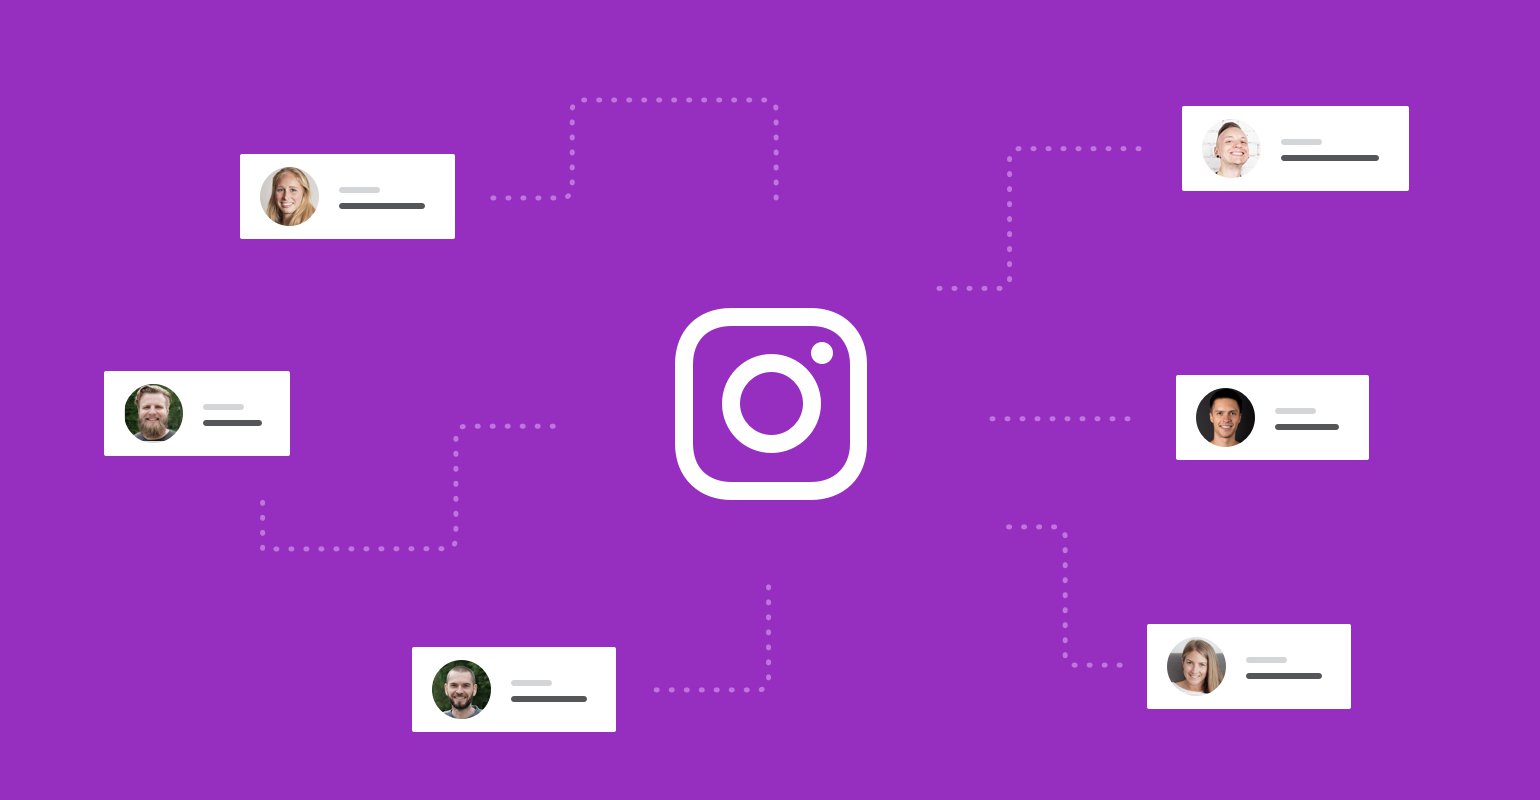 Did you know that you can use Instagram to grow your email list?